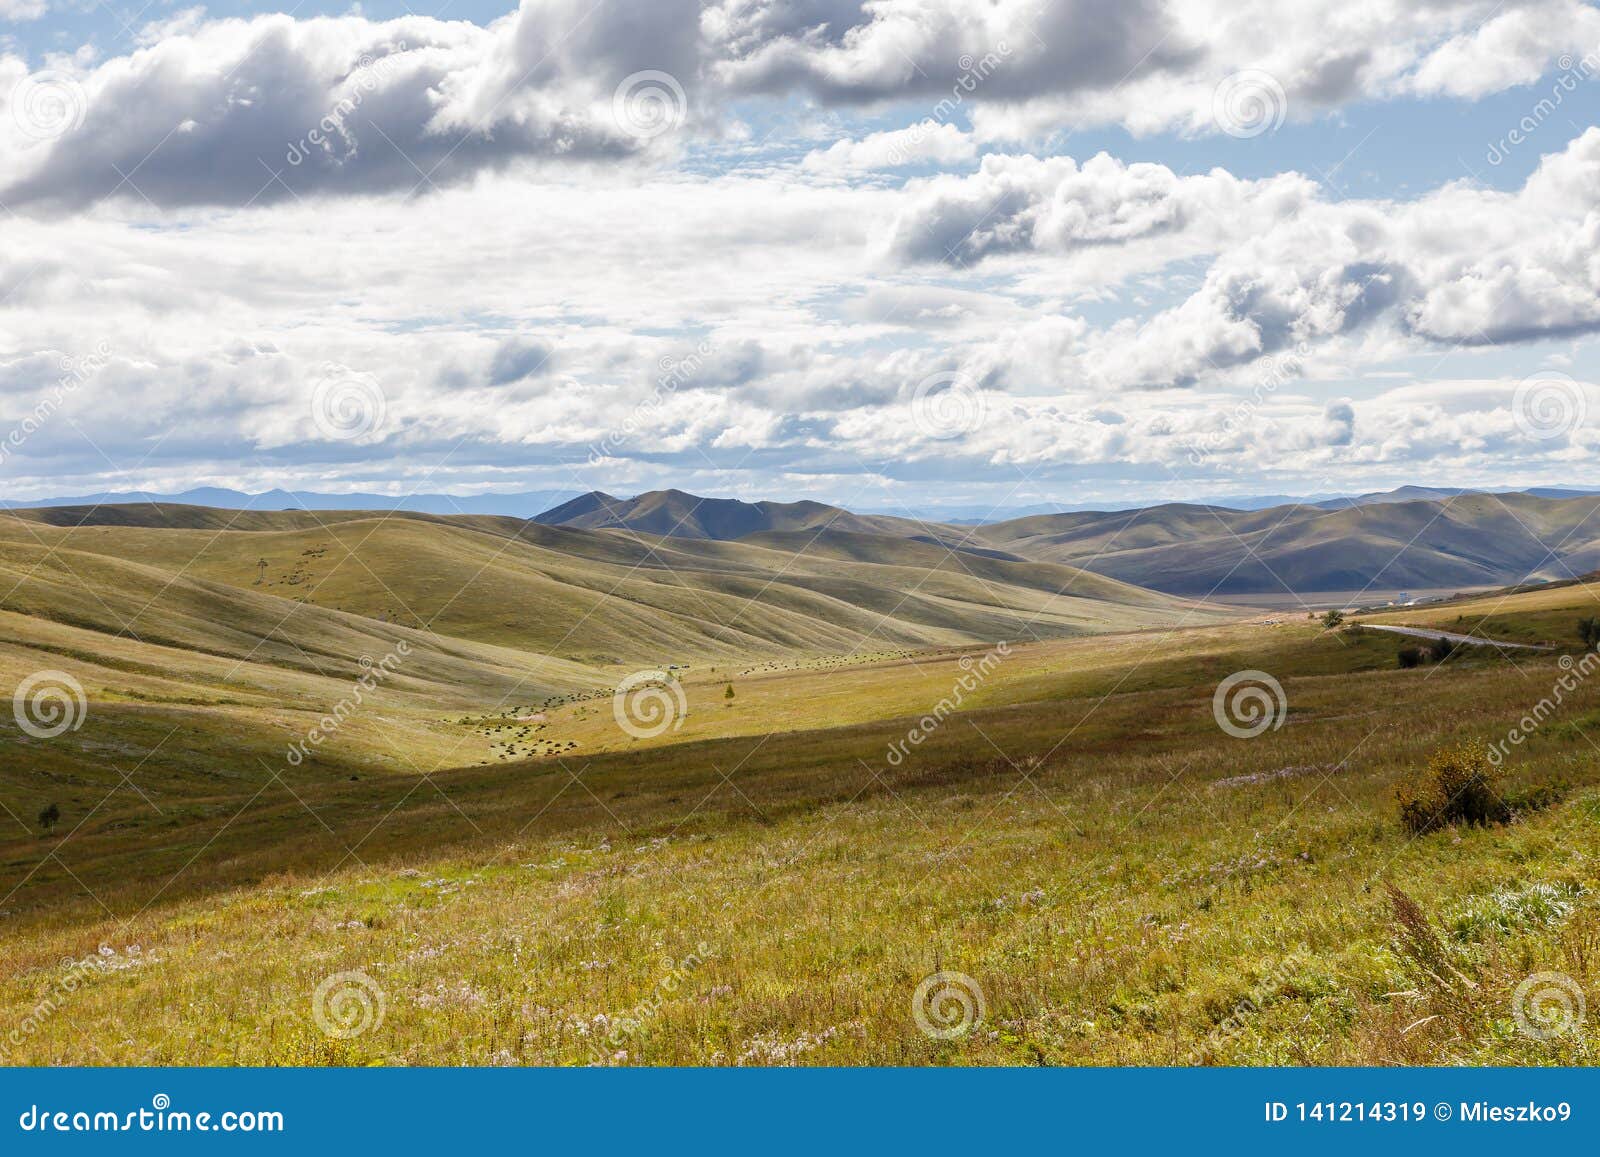 Mongolian Steppe with Grassland Stock Image - Image of indigenous, beauty:  141214319